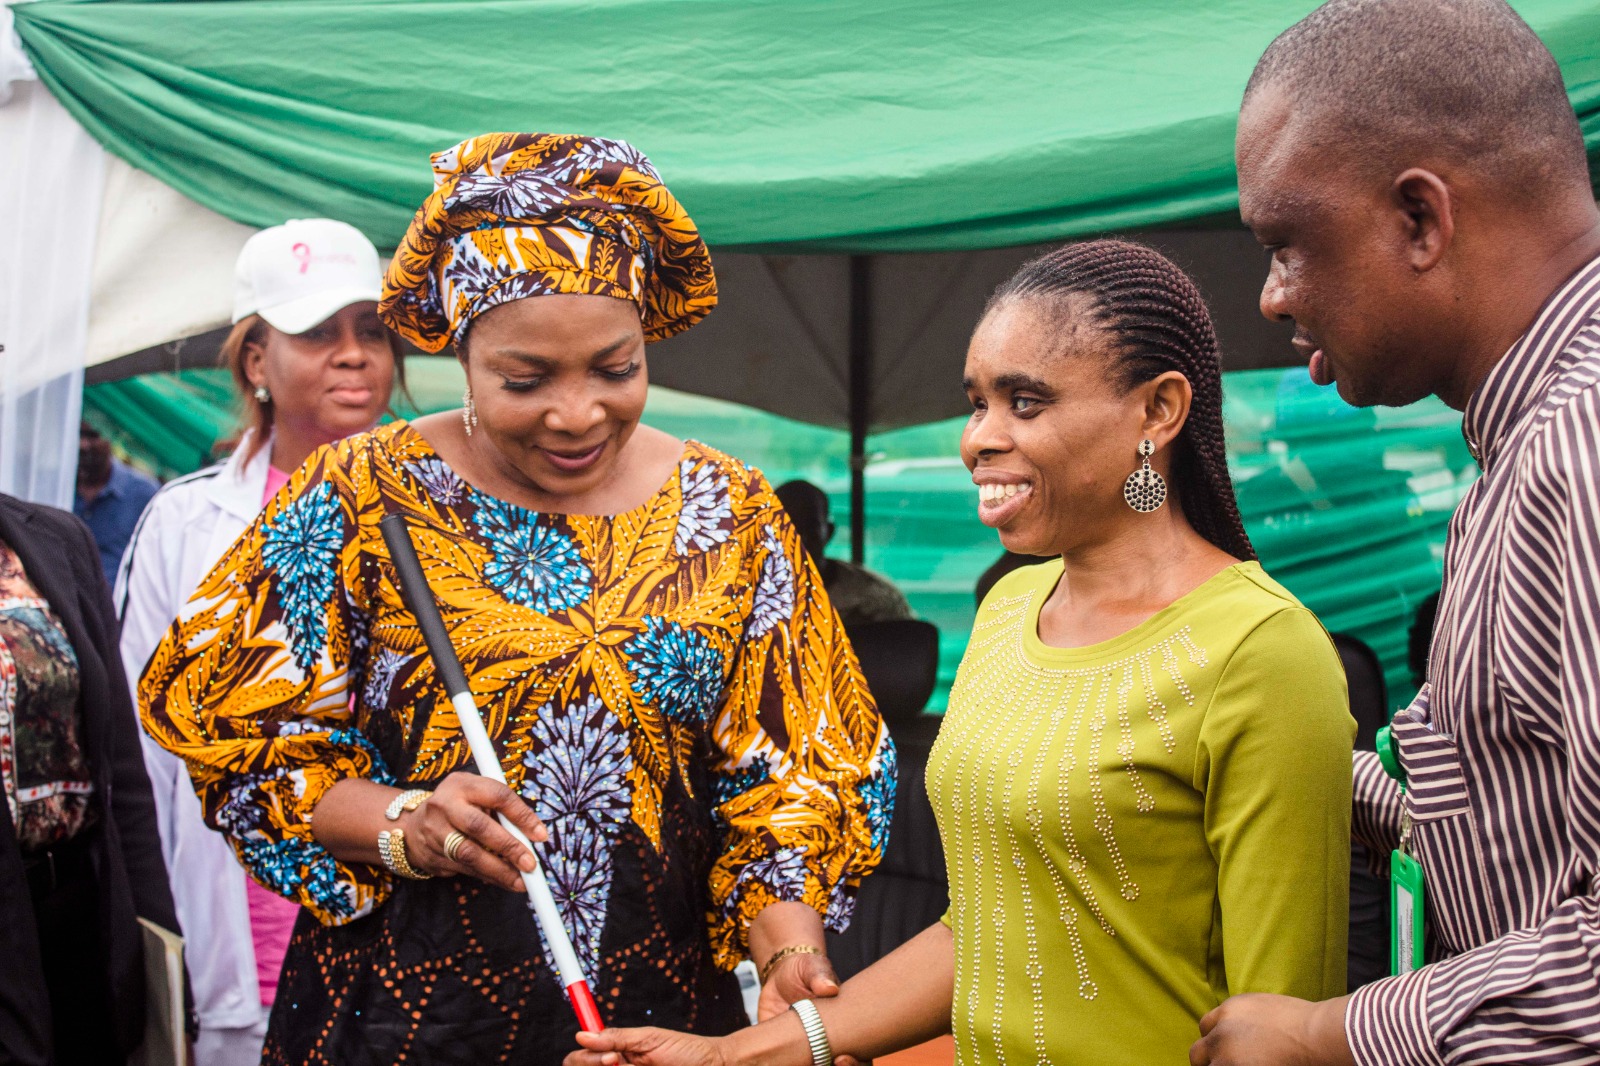 White Canes Safety Day: Abia Government Hand out White Canes to Visually Impaired